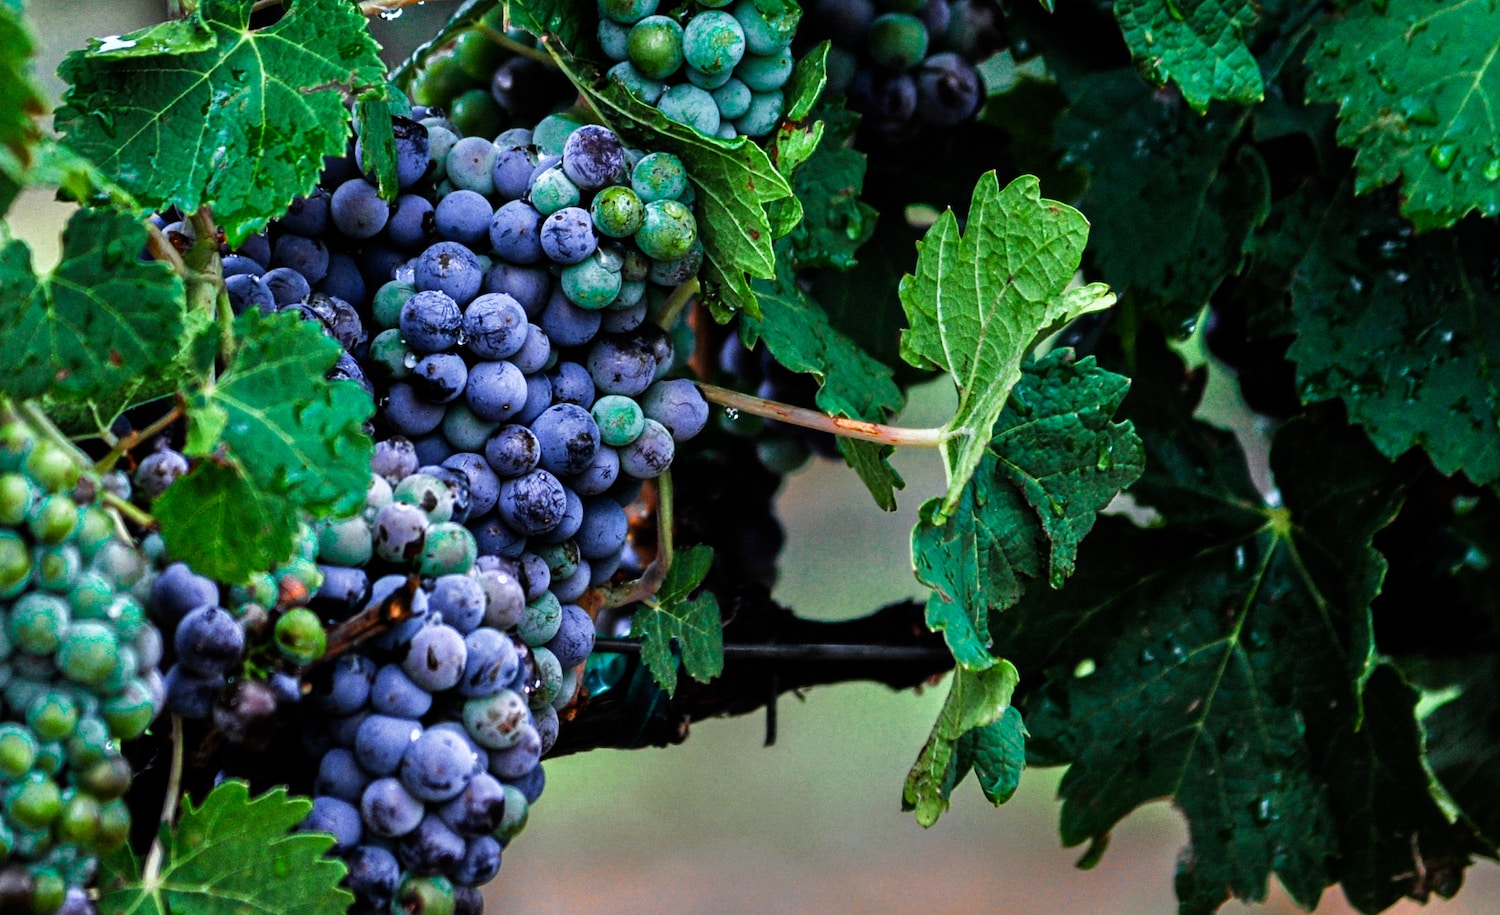 IN WHAT ORDER SHOULD WINE BE TASTED AND WHY IT MATTERS - Grape